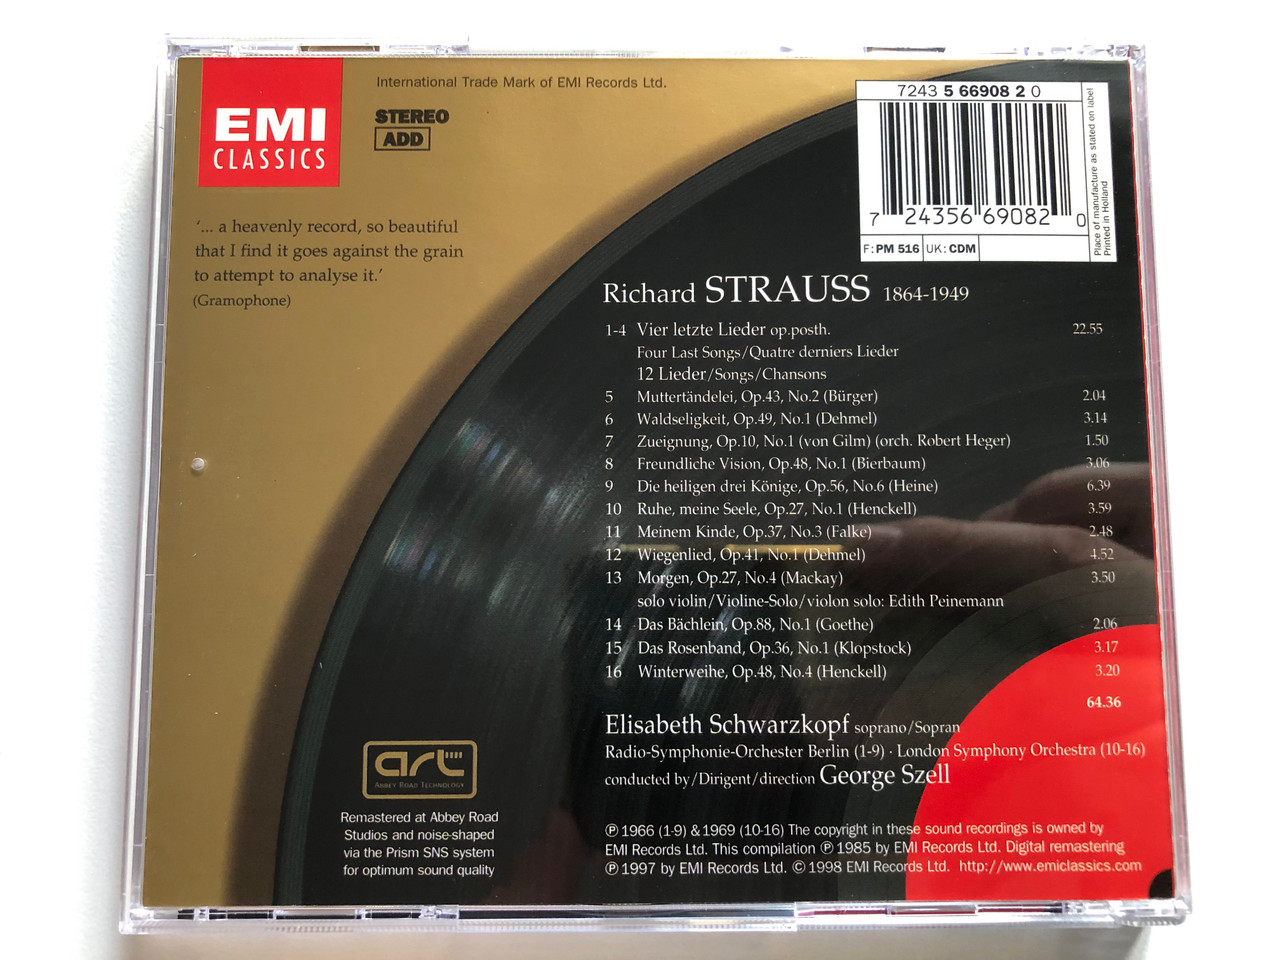 https://cdn11.bigcommerce.com/s-62bdpkt7pb/products/0/images/314286/Strauss_-_Four_Last_Songs_12_Orchestral_Songs_-_Elisabeth_Schwarzkopf_George_Szell_Radio-Symphonie-Orchester_Berlin_The_London_Symphony_Orchestra_Great_Recordings_Of_The_Century_EMI_A__31293.1701412180.1280.1280.JPG?c=2